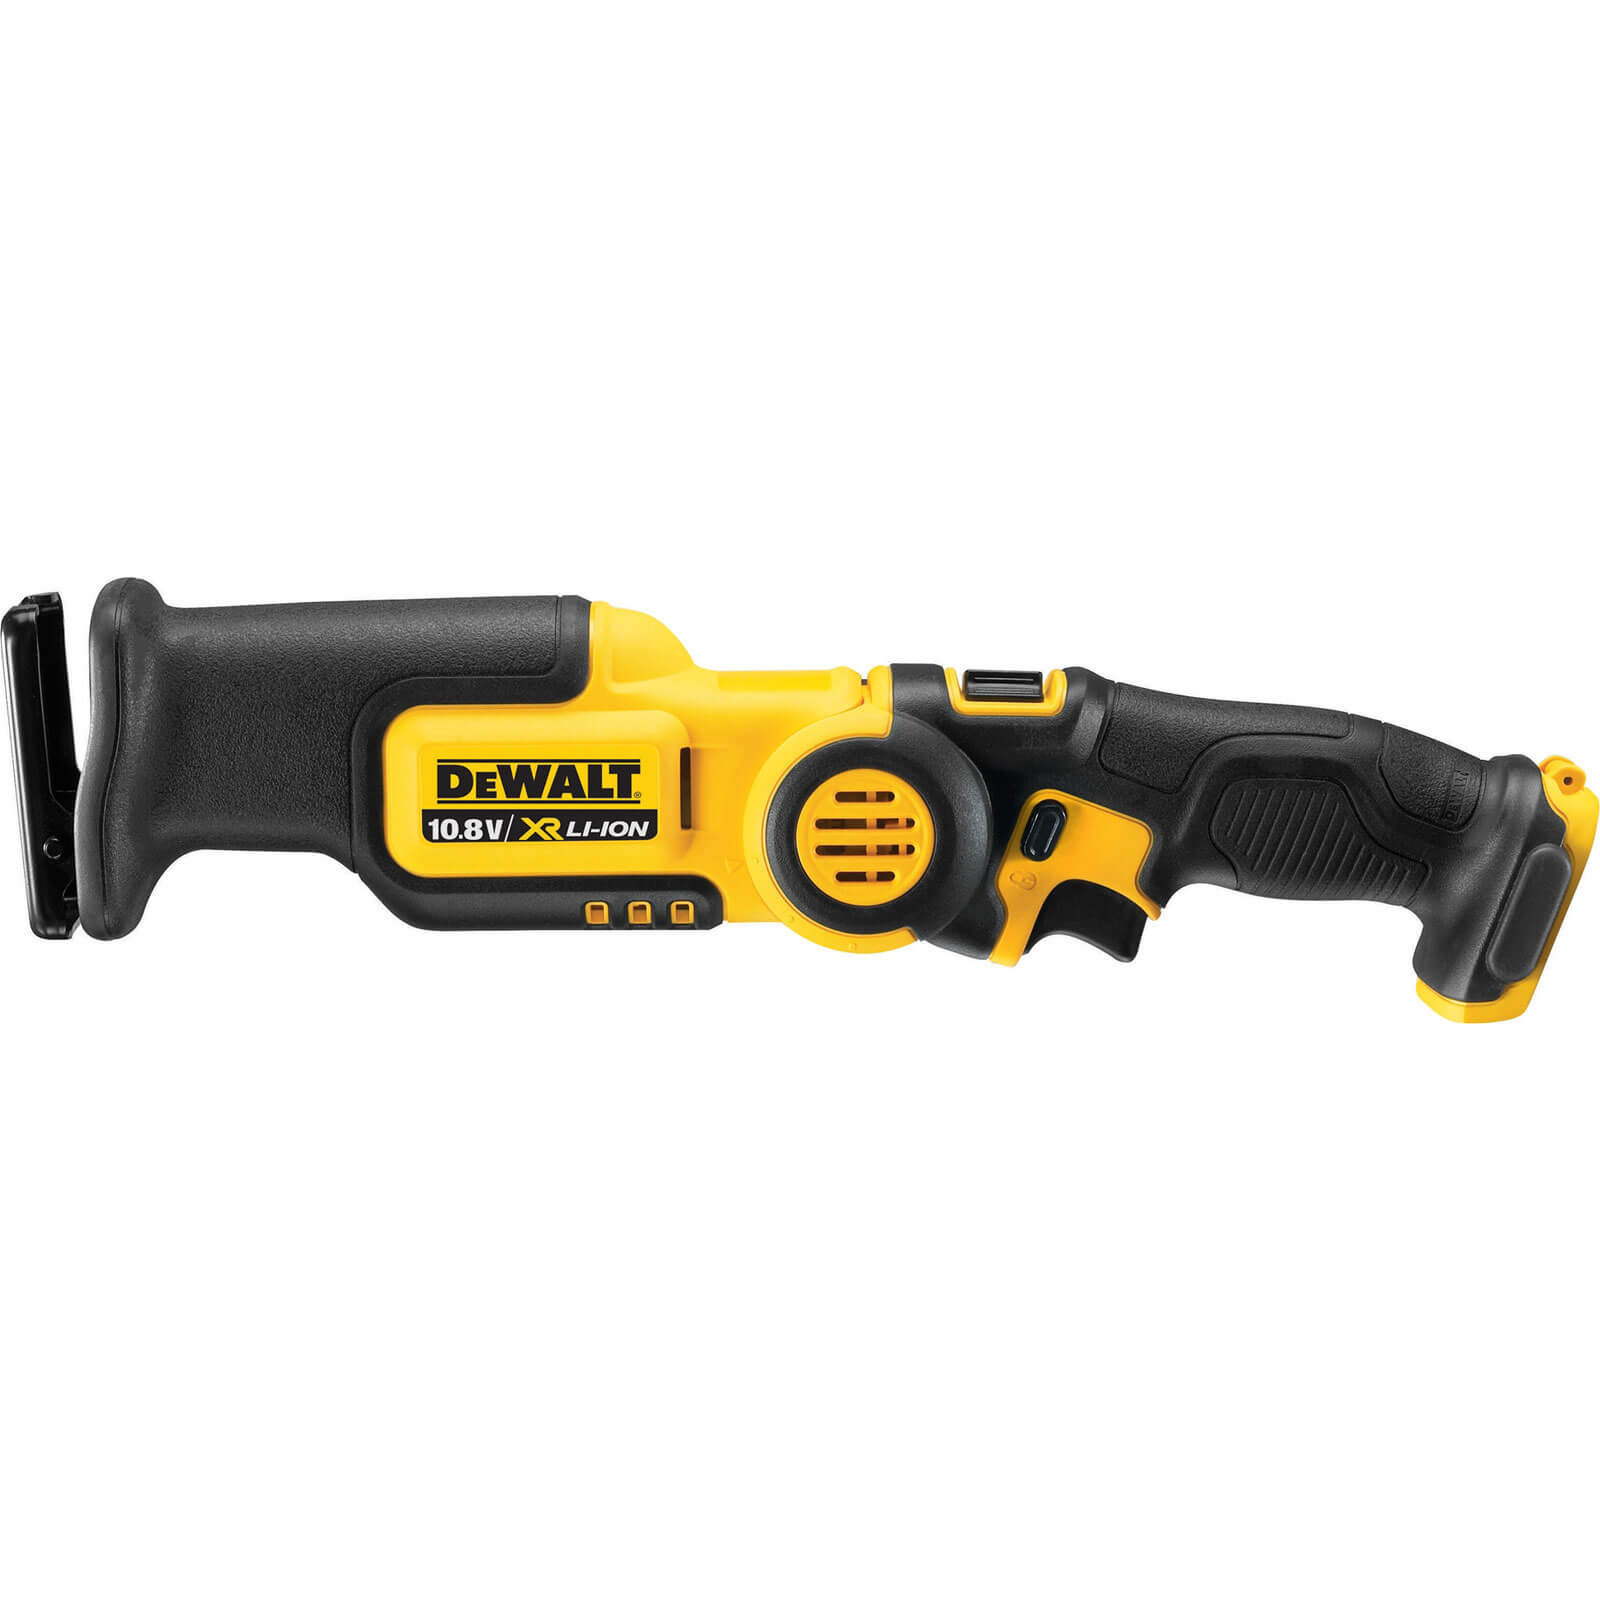 DeWalt DCS310N 10.8v Cordless Lithium Ion XR Compact Pivot Reciprocating Saw without Battery or Char